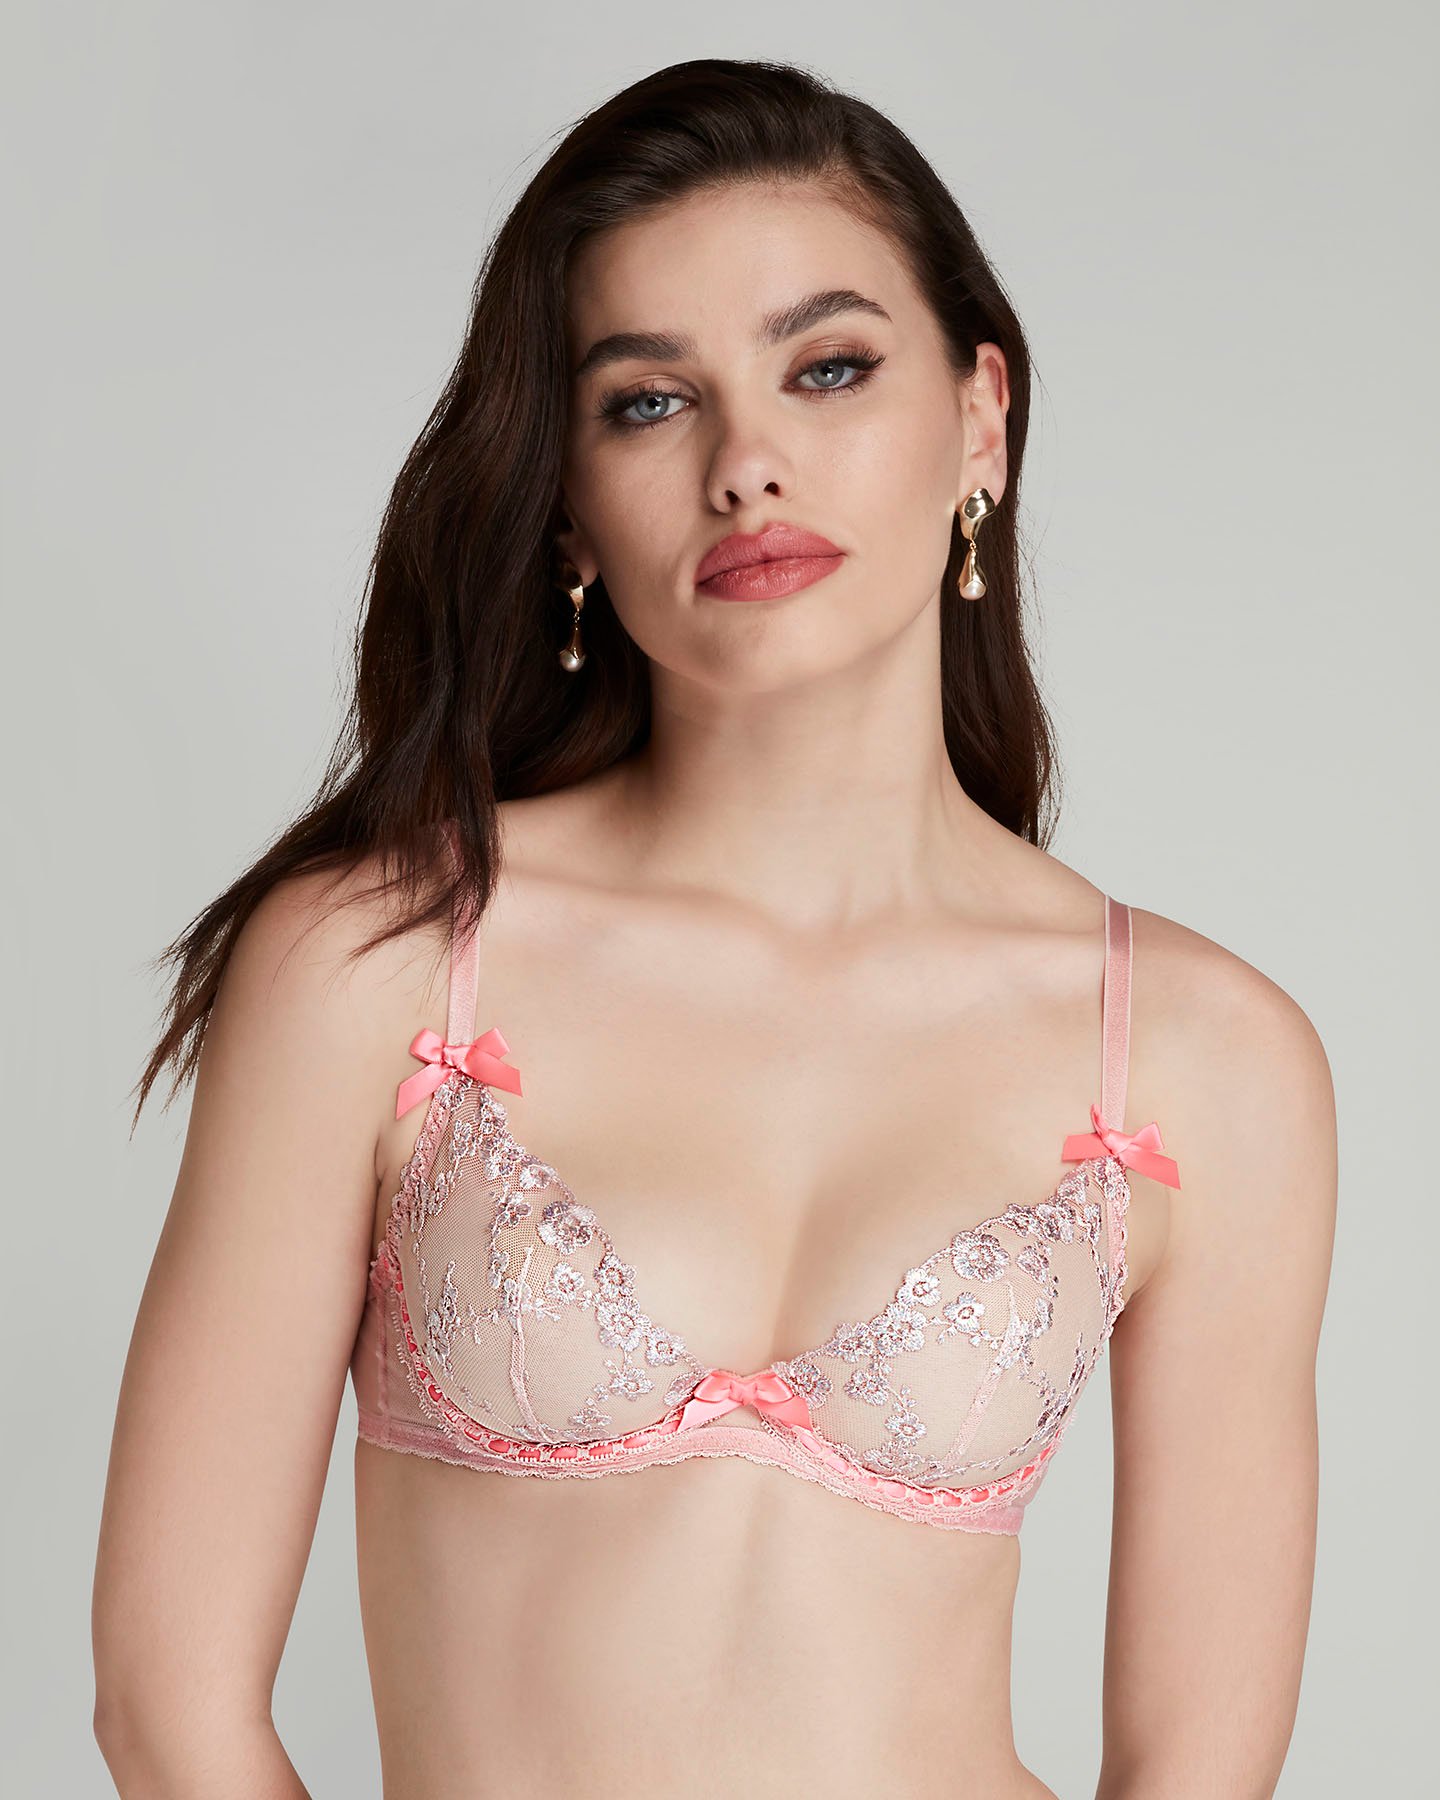 Adelie Plunge Underwired Bra in Baby Pink/Hot Pink | By Agent Provocateur New In